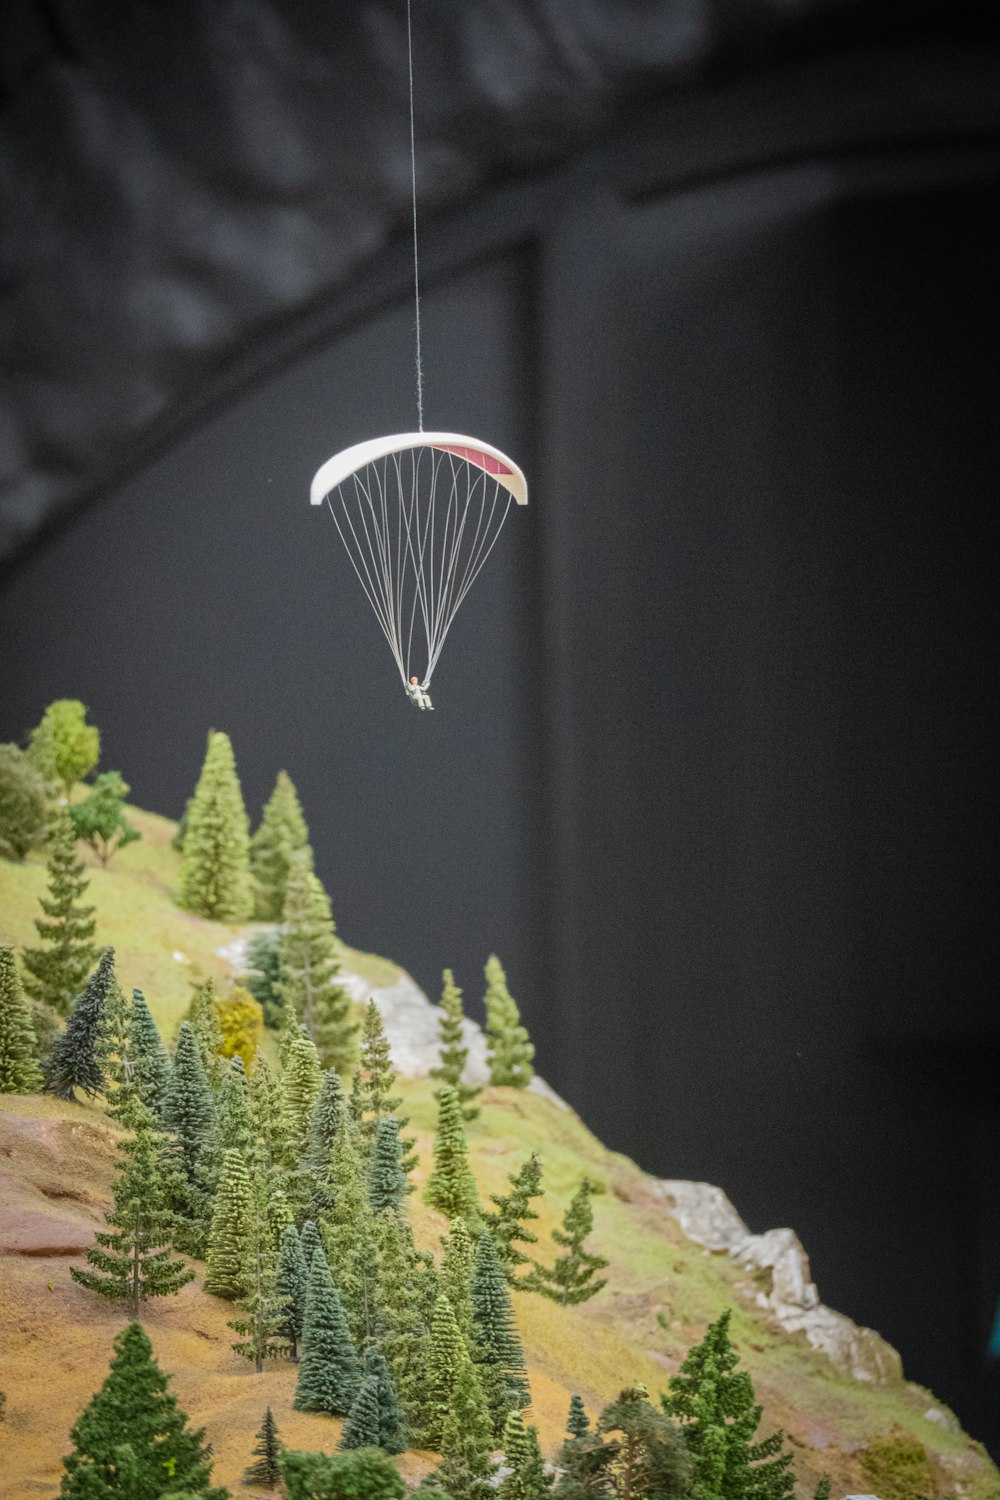 a model of a parachute being flown over a forest